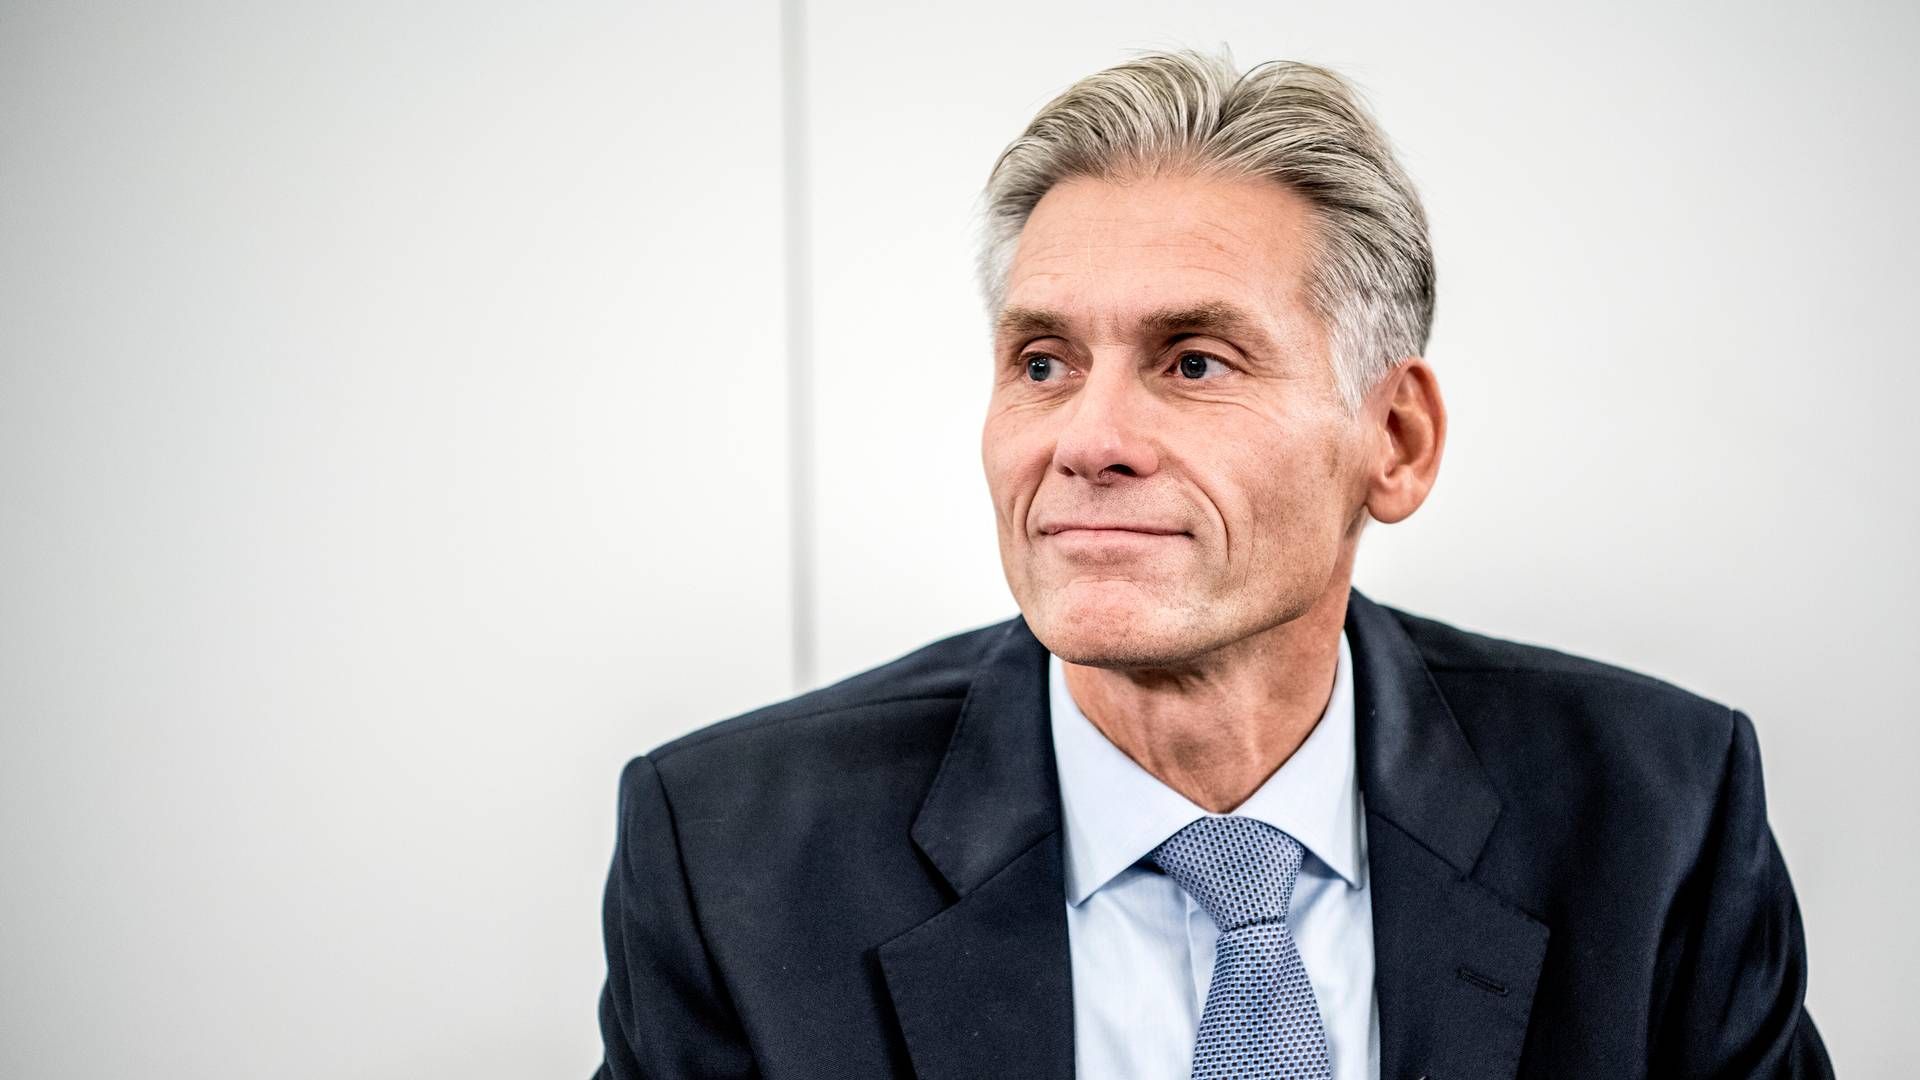 Thomas F. Borgen was CEO of Danske Bank from 2013 to 2018 before a highly publicized money laundering case forced him to resign. | Photo: Stine Bidstrup/Ritzau/Ritzau Scanpix